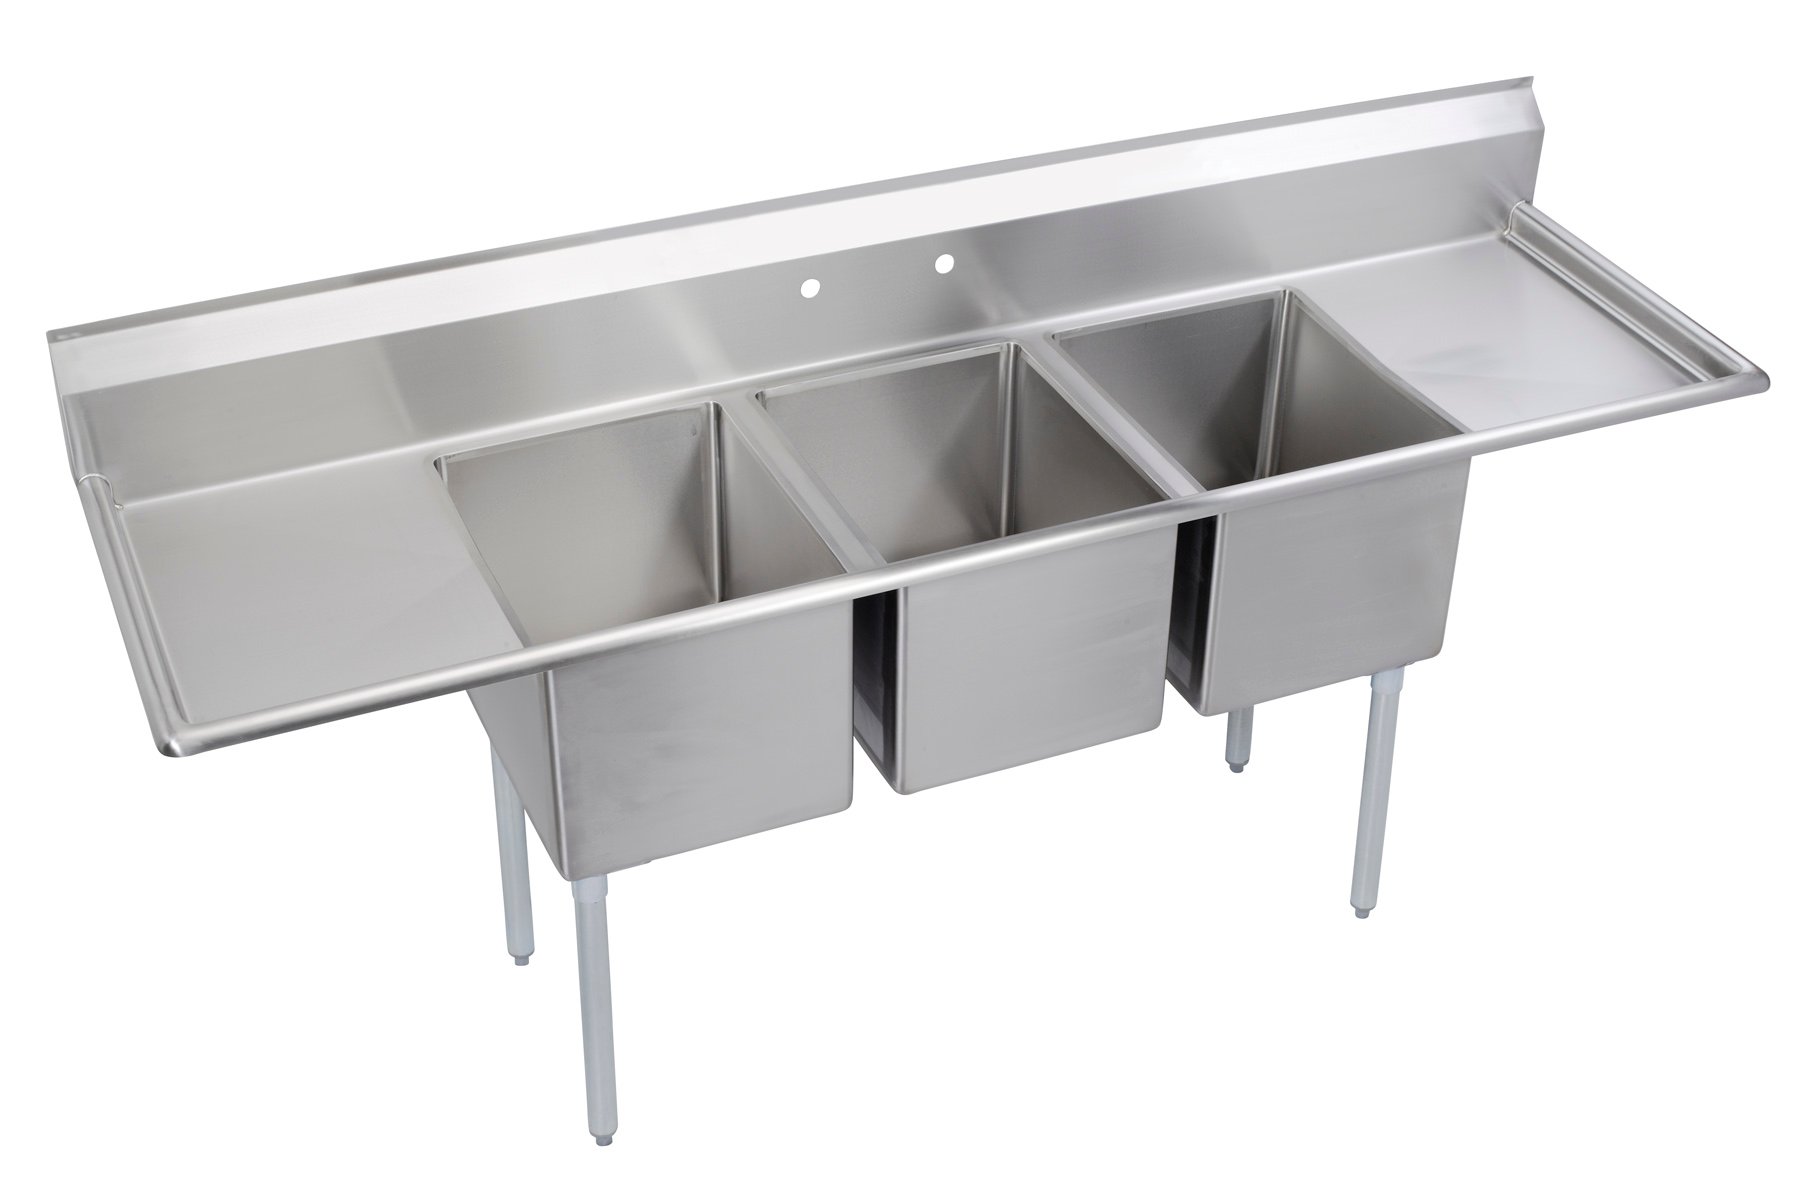 3 compartment sink for commercial kitchen